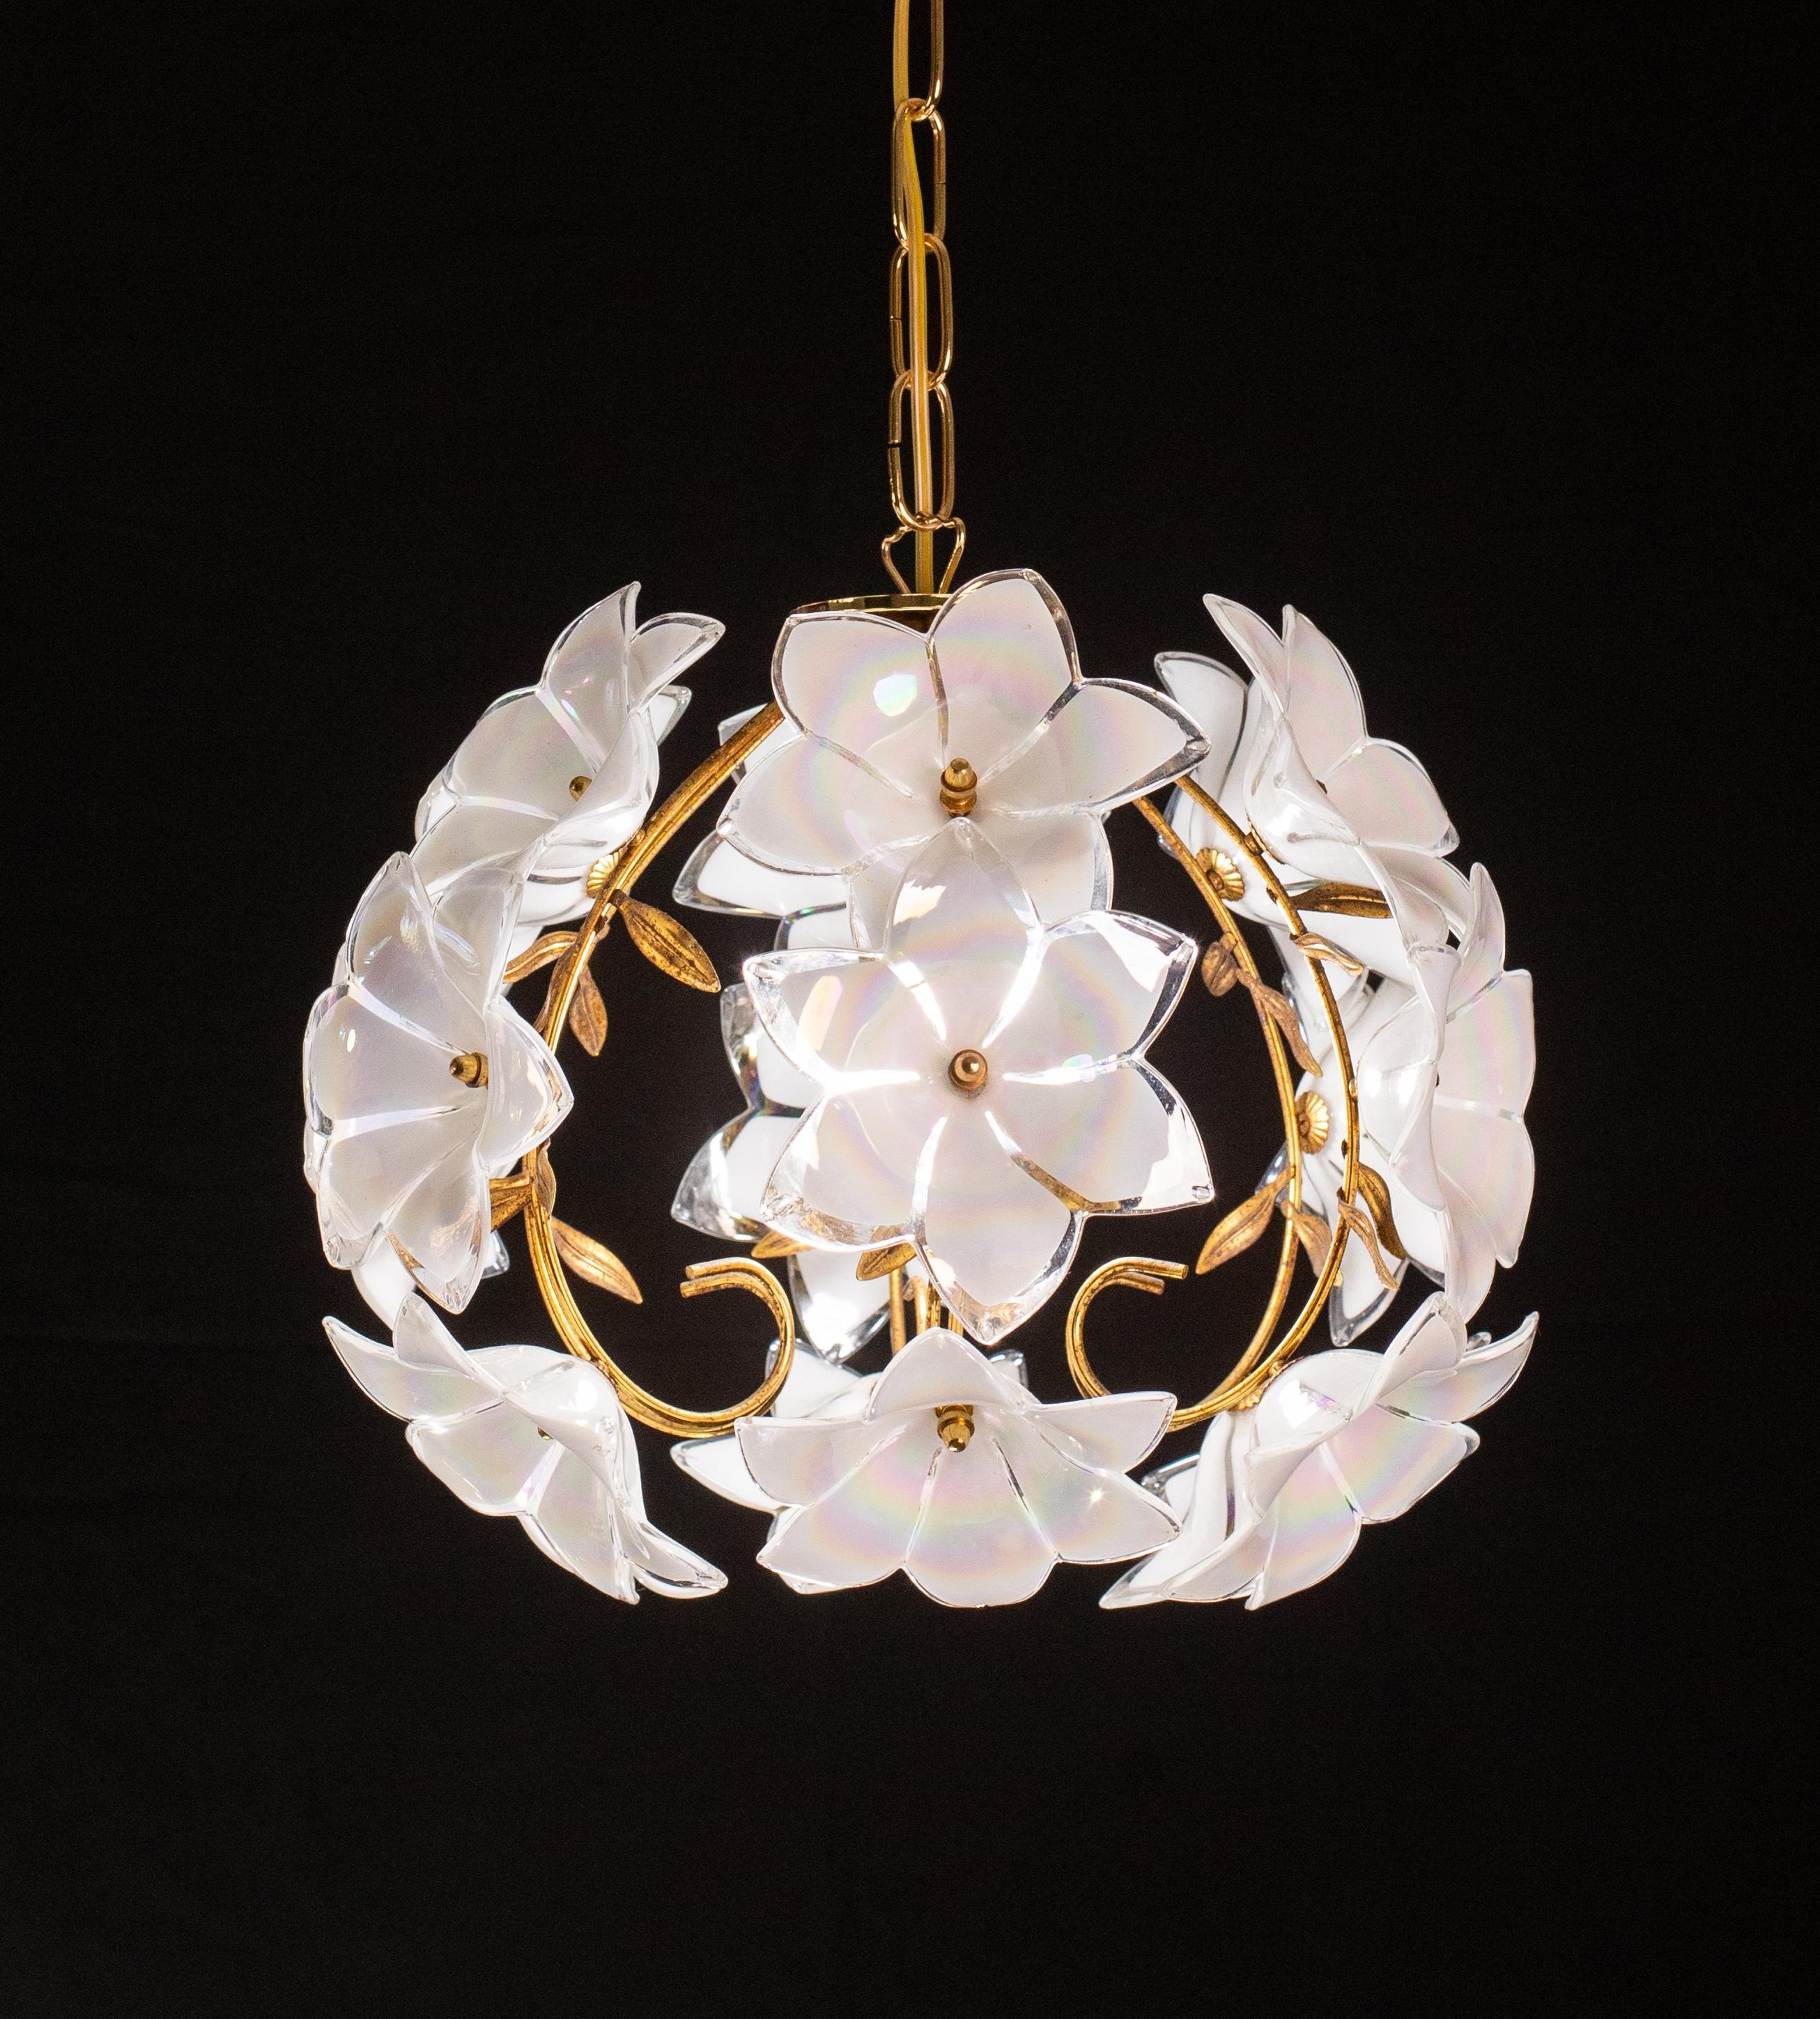 Set of 2 Murano Spherical Chandelier Full of White Flowers, 1980s In Good Condition For Sale In Roma, IT